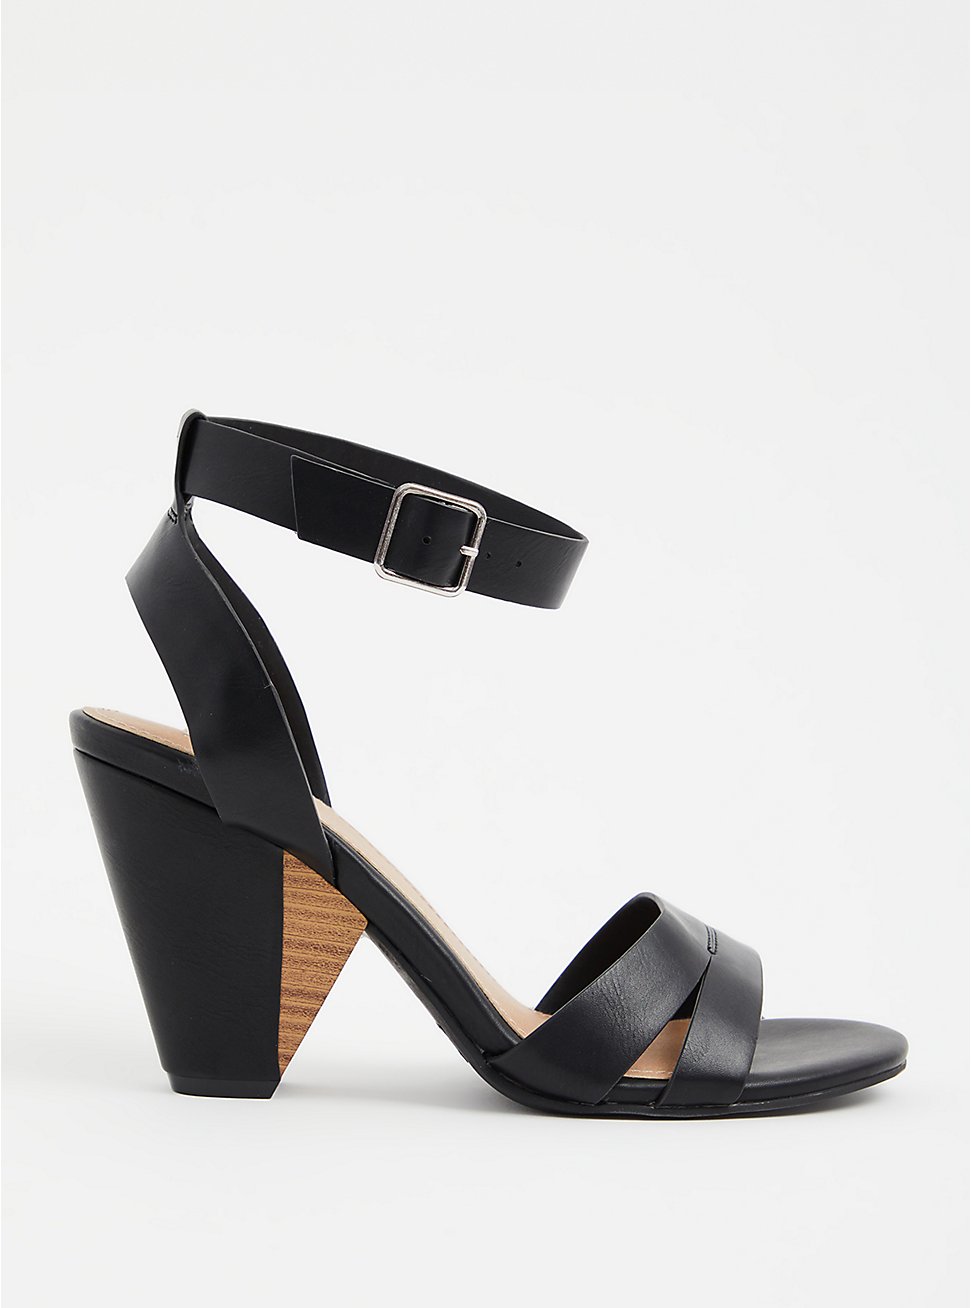 Black Faux Leather Ankle Strap Cone Heel (WW), BLACK, hi-res